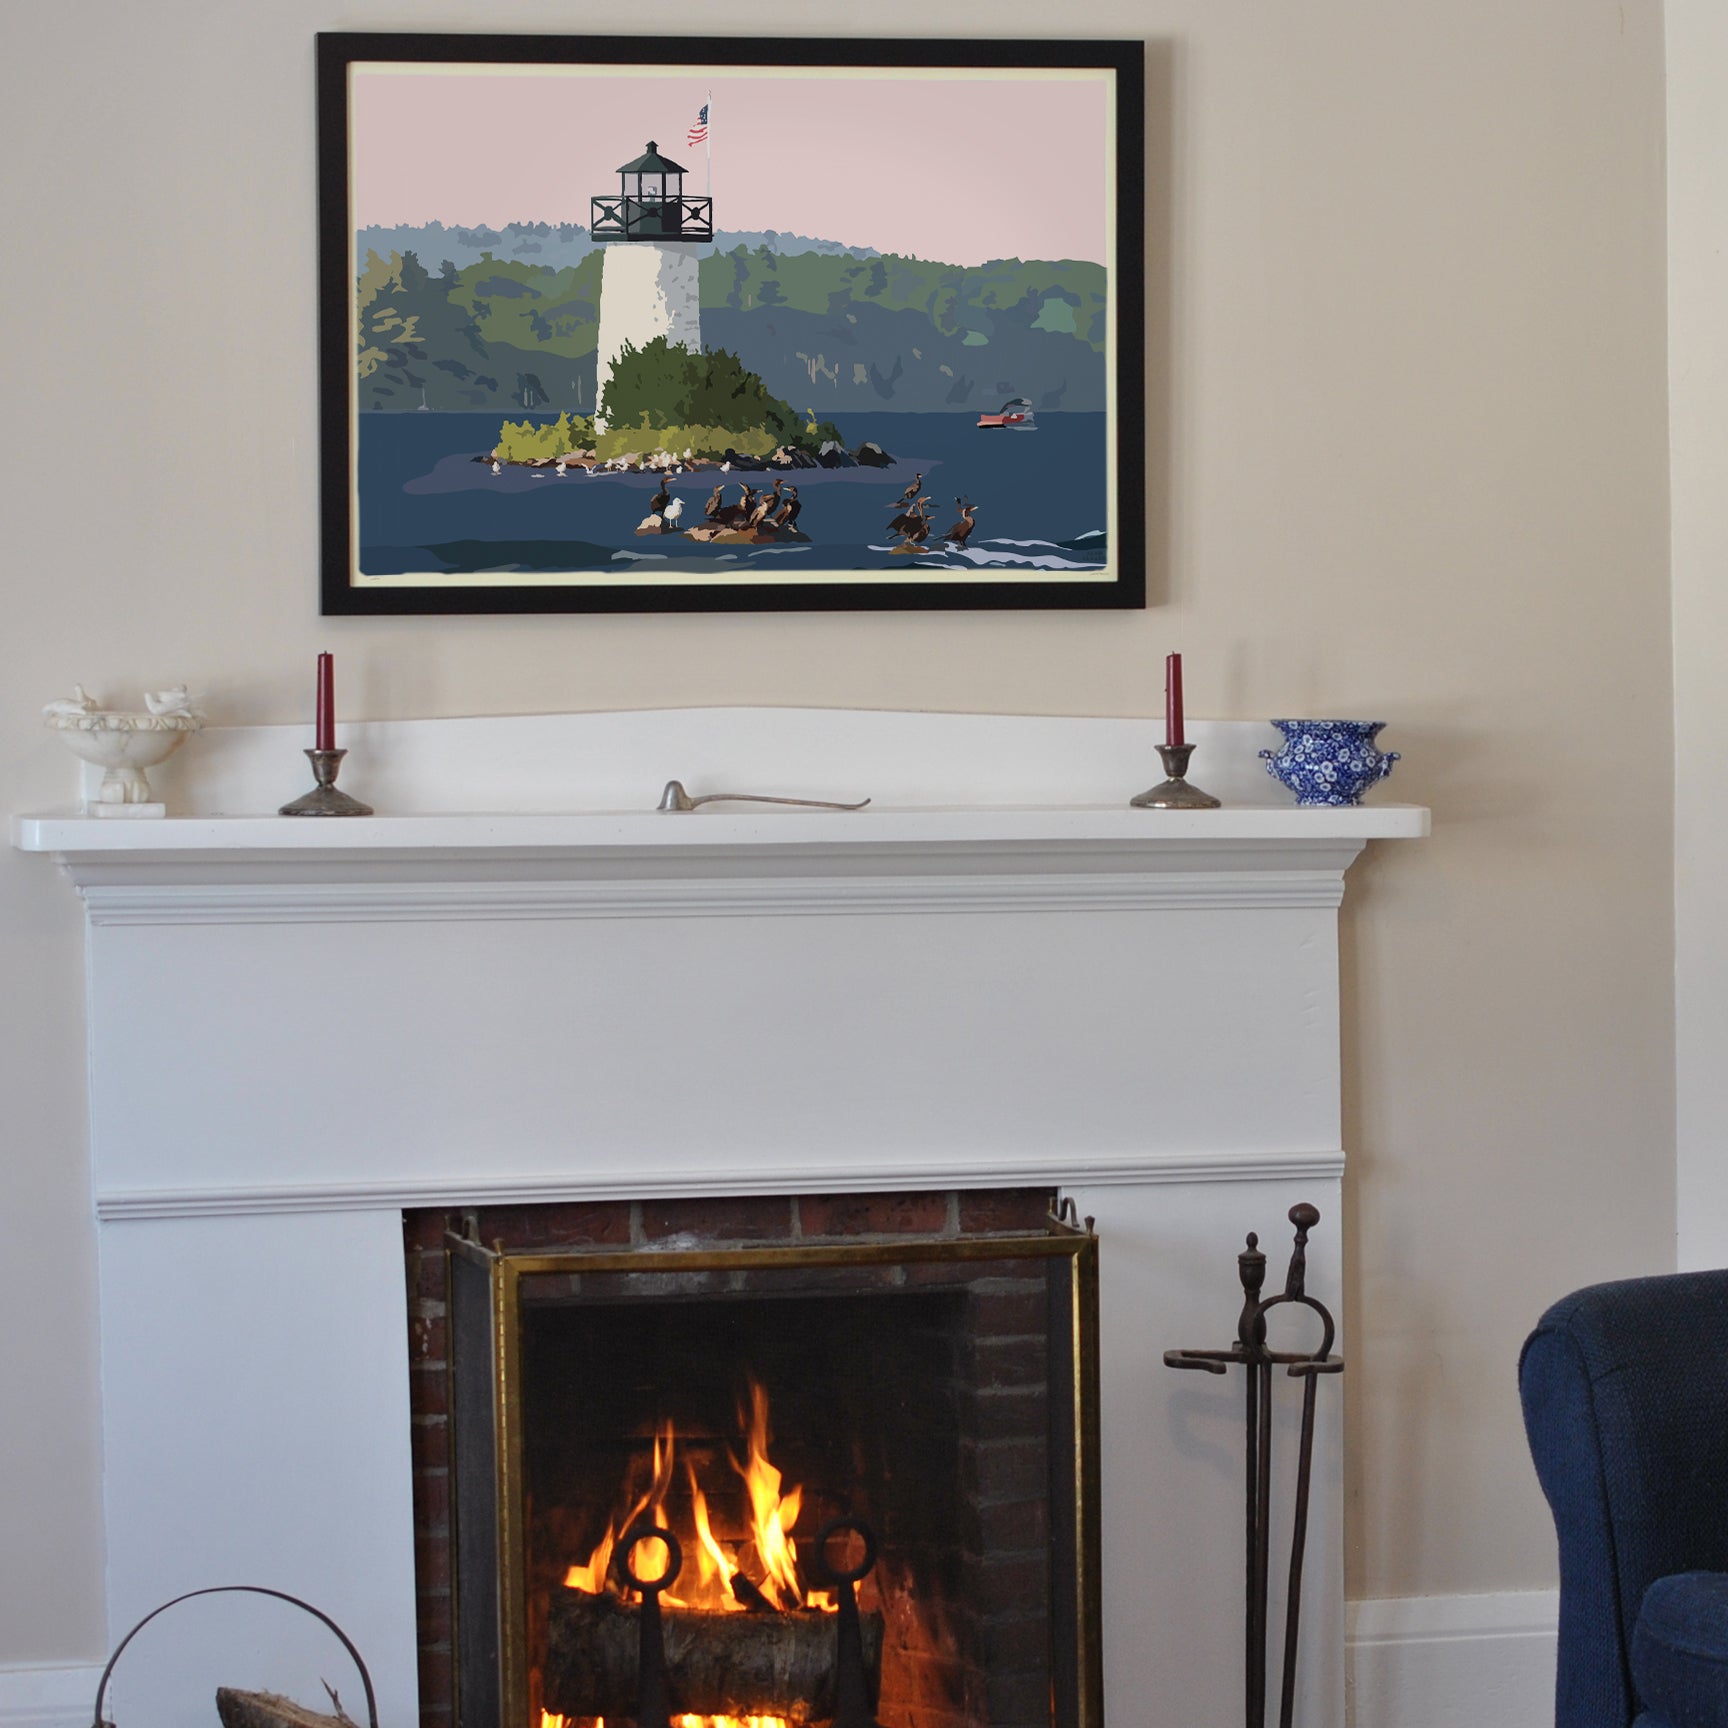 Sunset at Ladies Delight Lighthouse Art Print 24" x 36" Horizontal Framed Wall Poster By Alan Claude - Maine